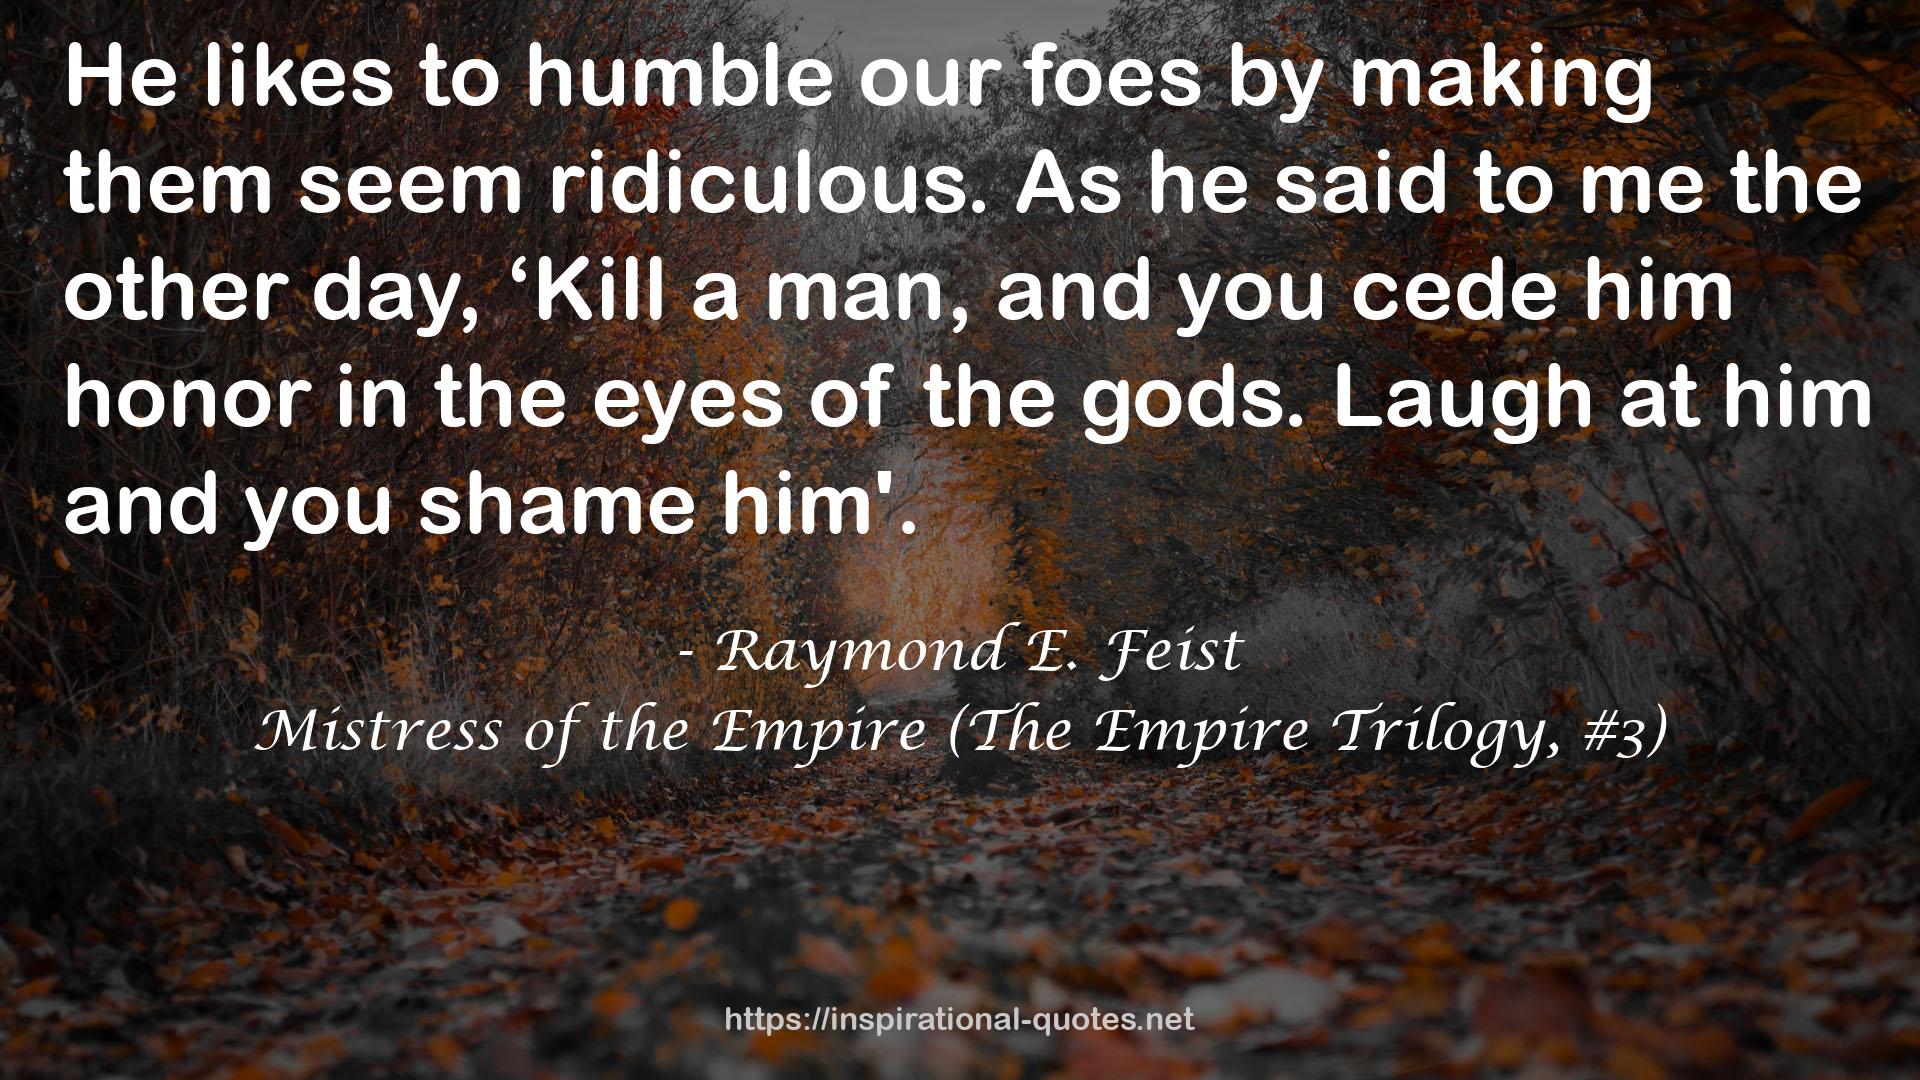 Mistress of the Empire (The Empire Trilogy, #3) QUOTES